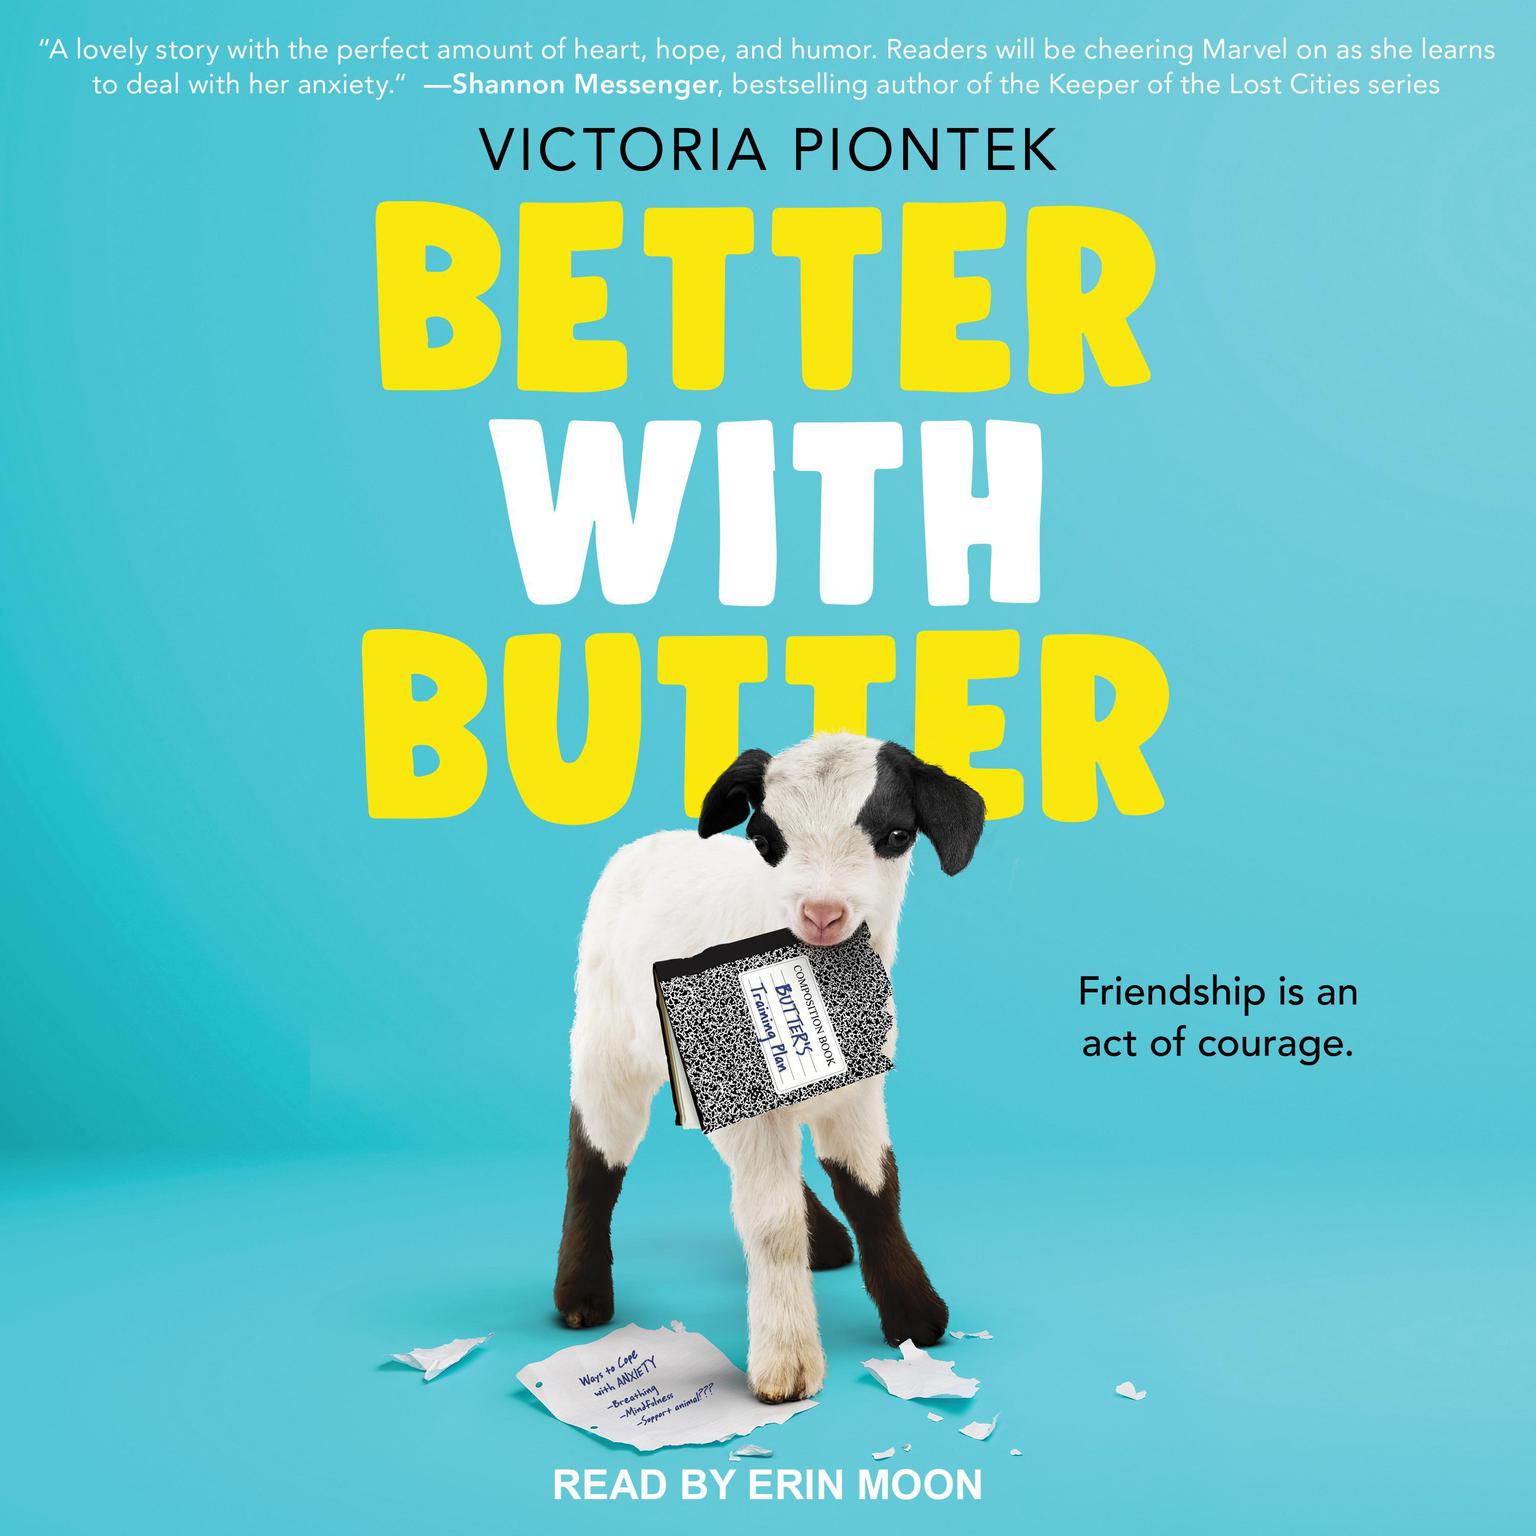 Better With Butter Audiobook, by Victoria Piontek